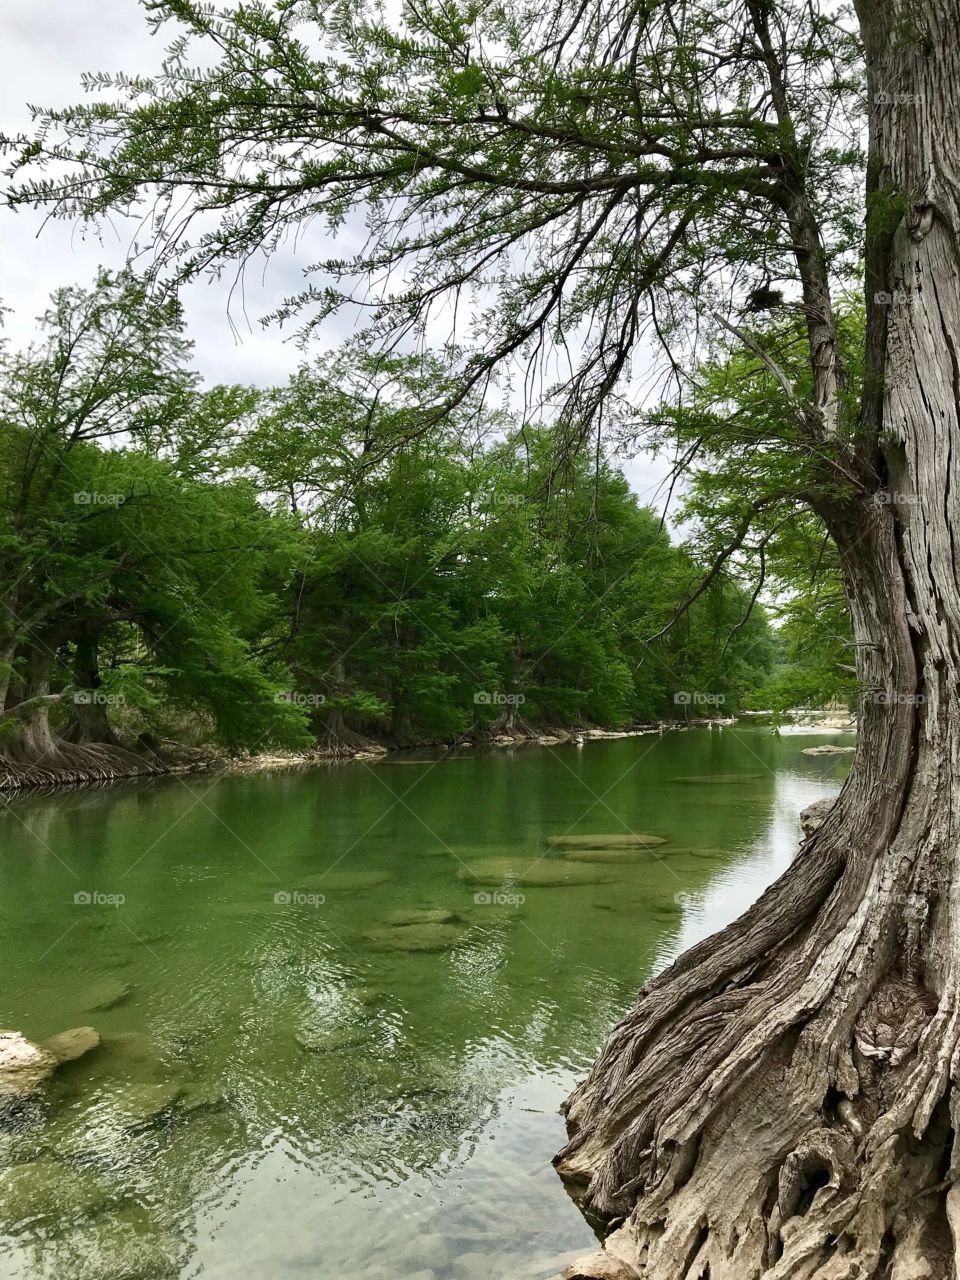 Pedernales River. A day playing on the banks of the river. 